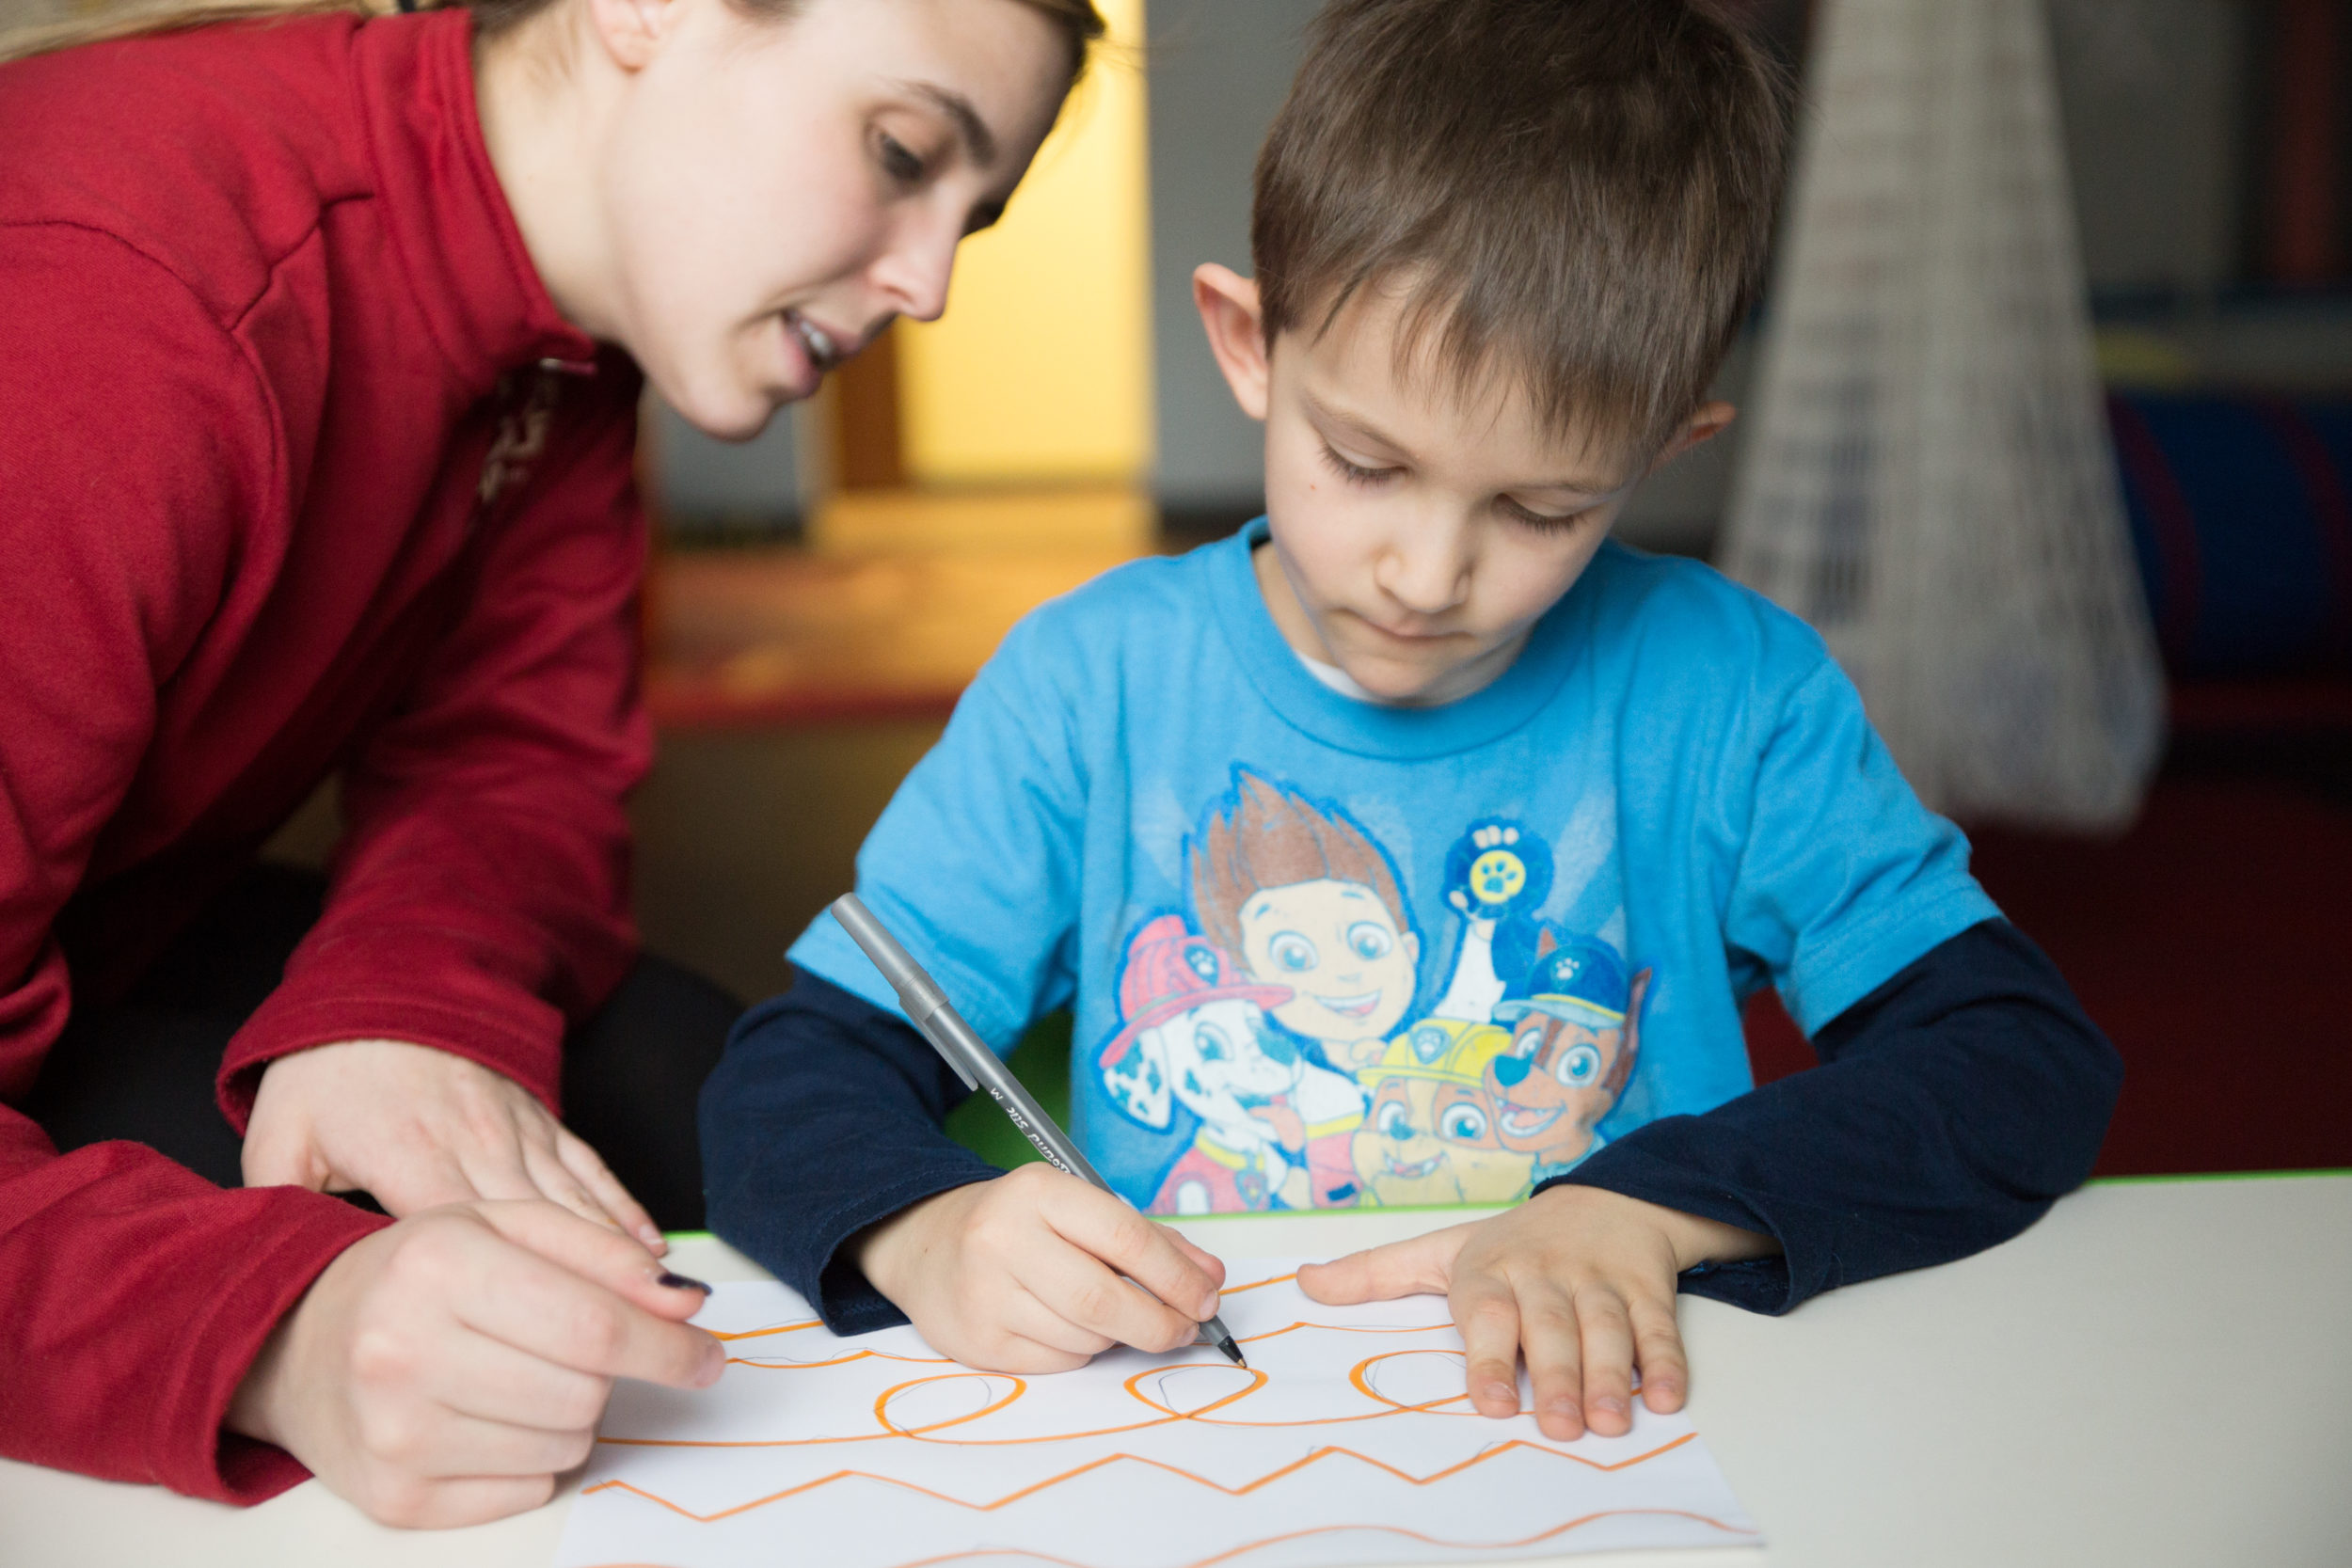 an aba therapist at westside helps a child with a drawing exercise